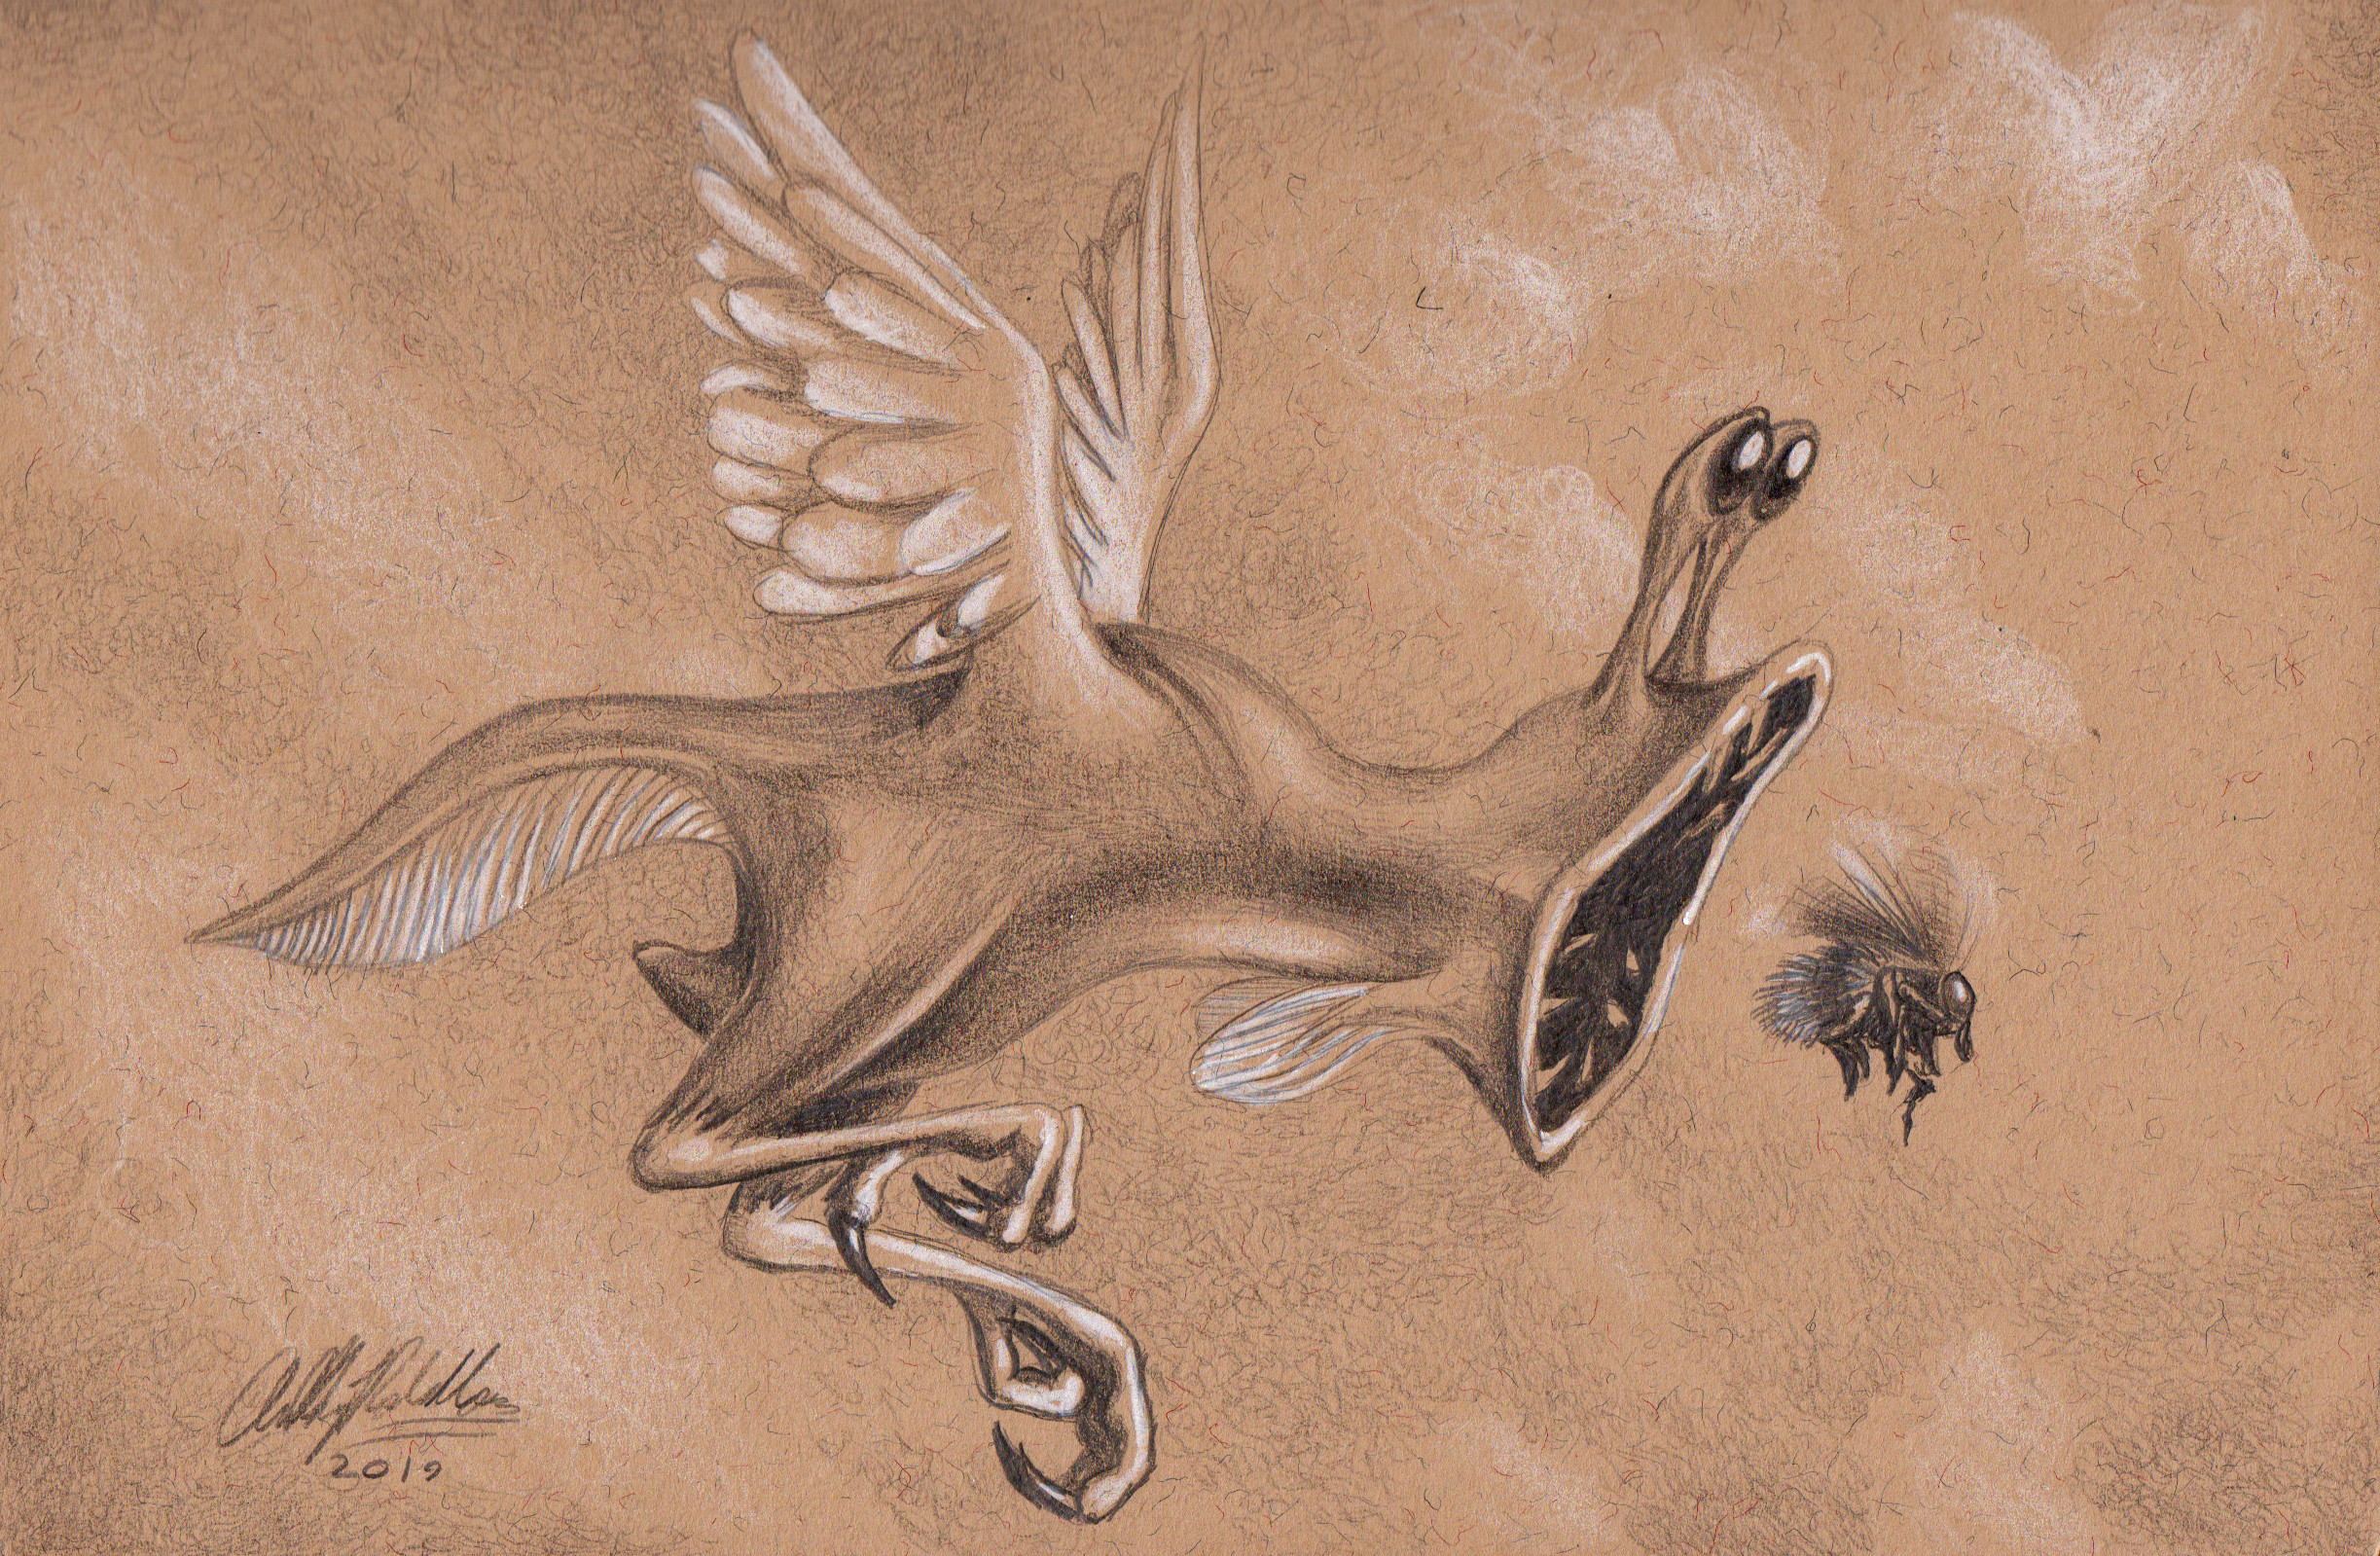 Bee Chase
Pencil on toned paper